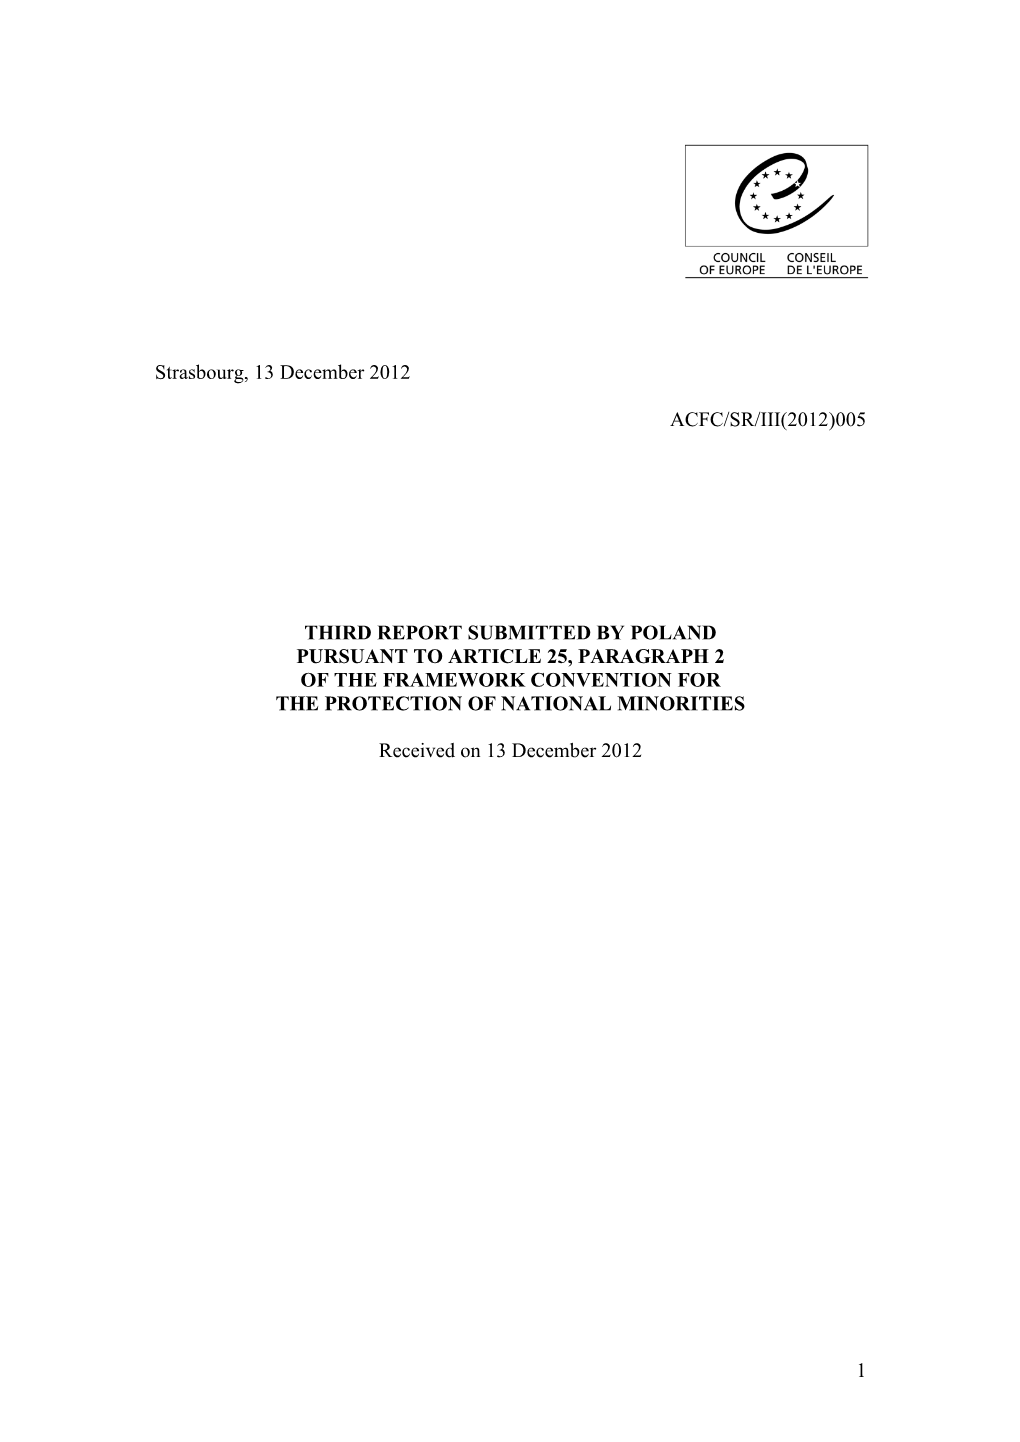 Report for the Secretary-General of the Council of Europe